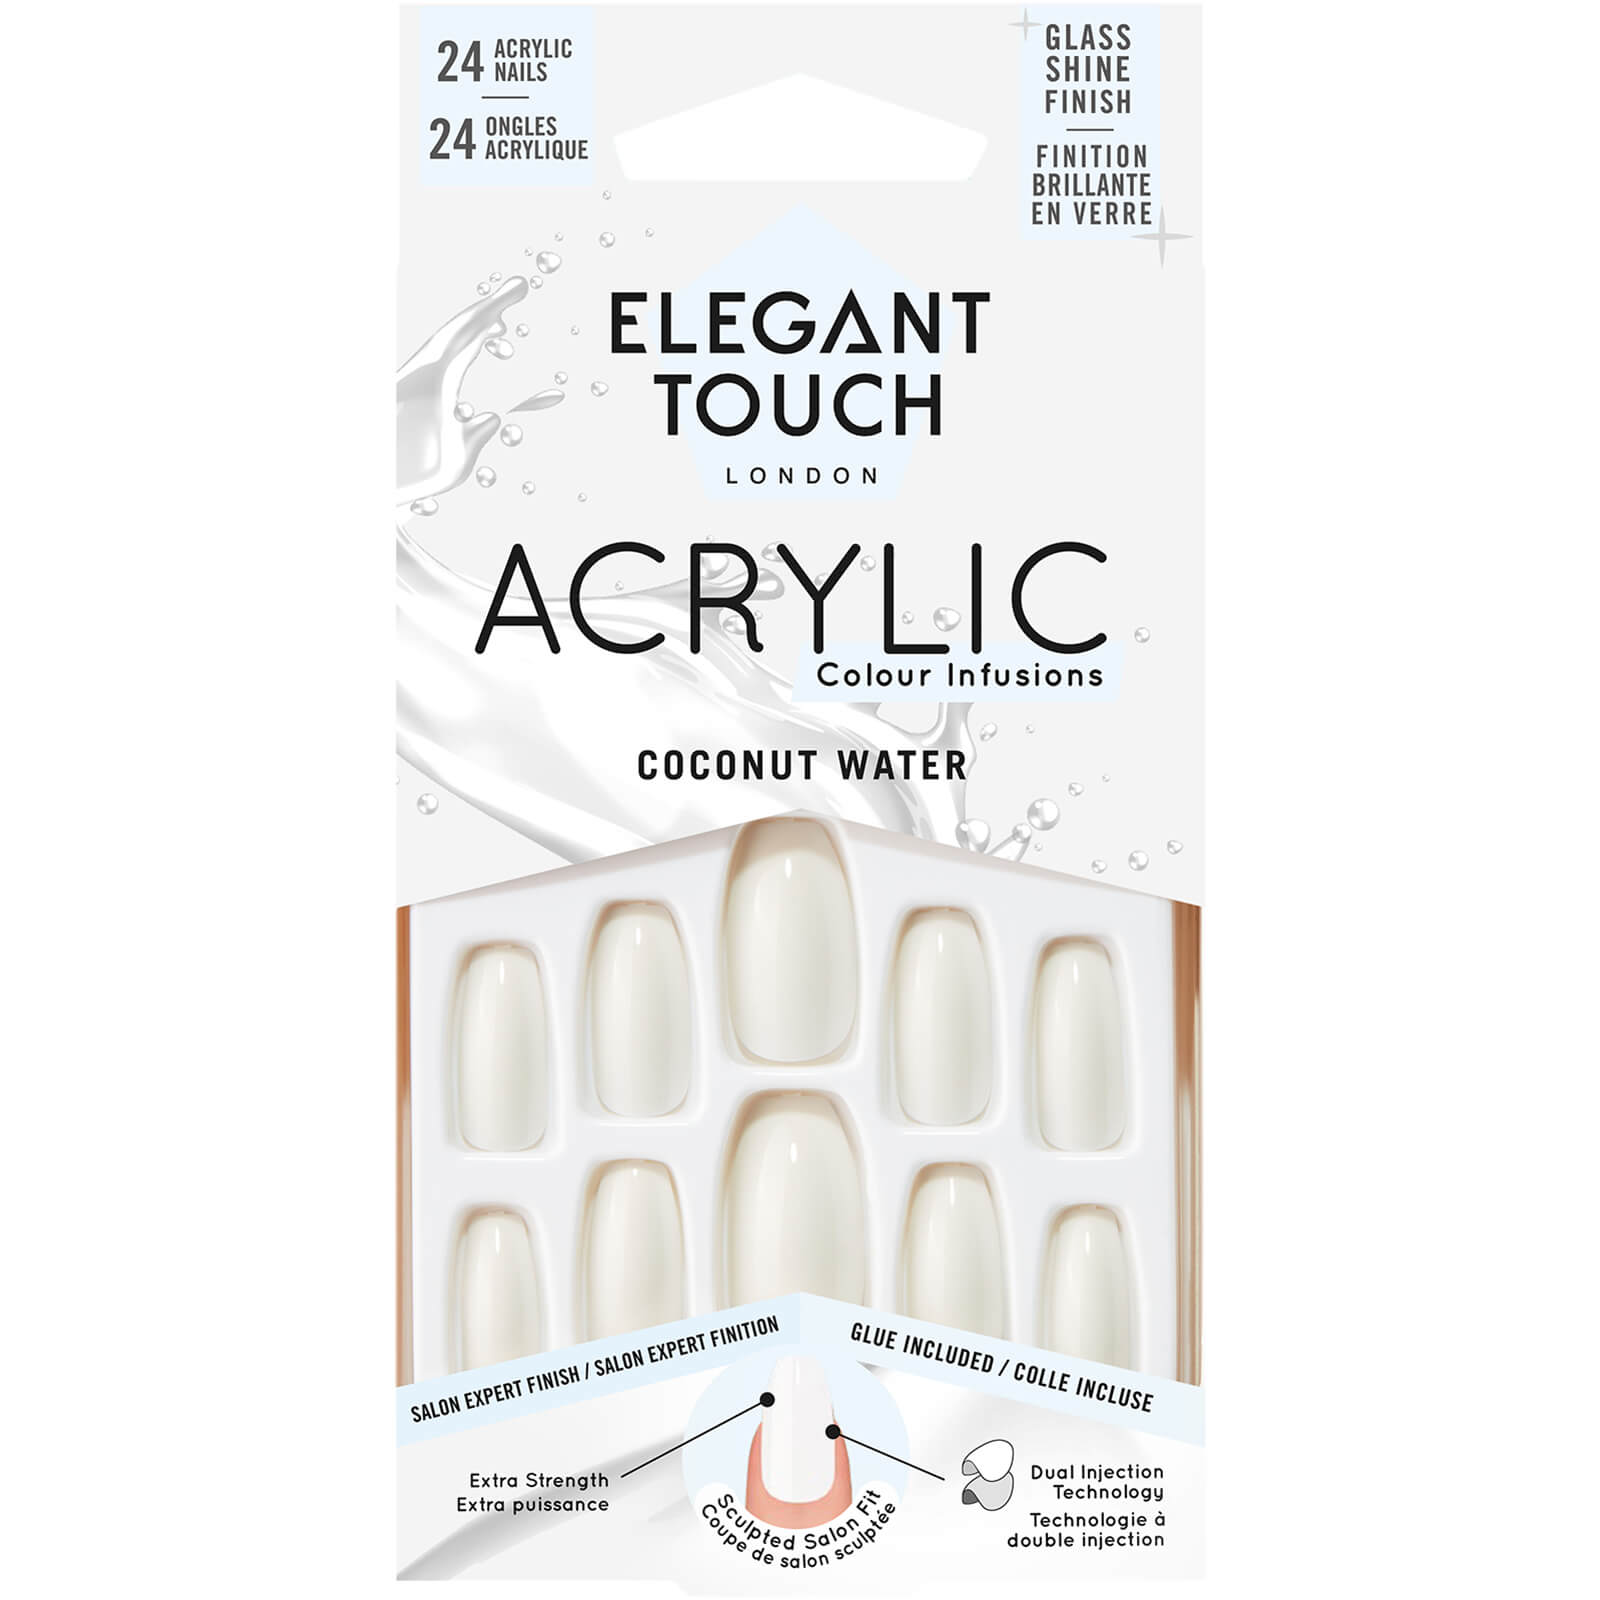 Elegant Touch Acrylic Nail Kit - Coconut Water In White